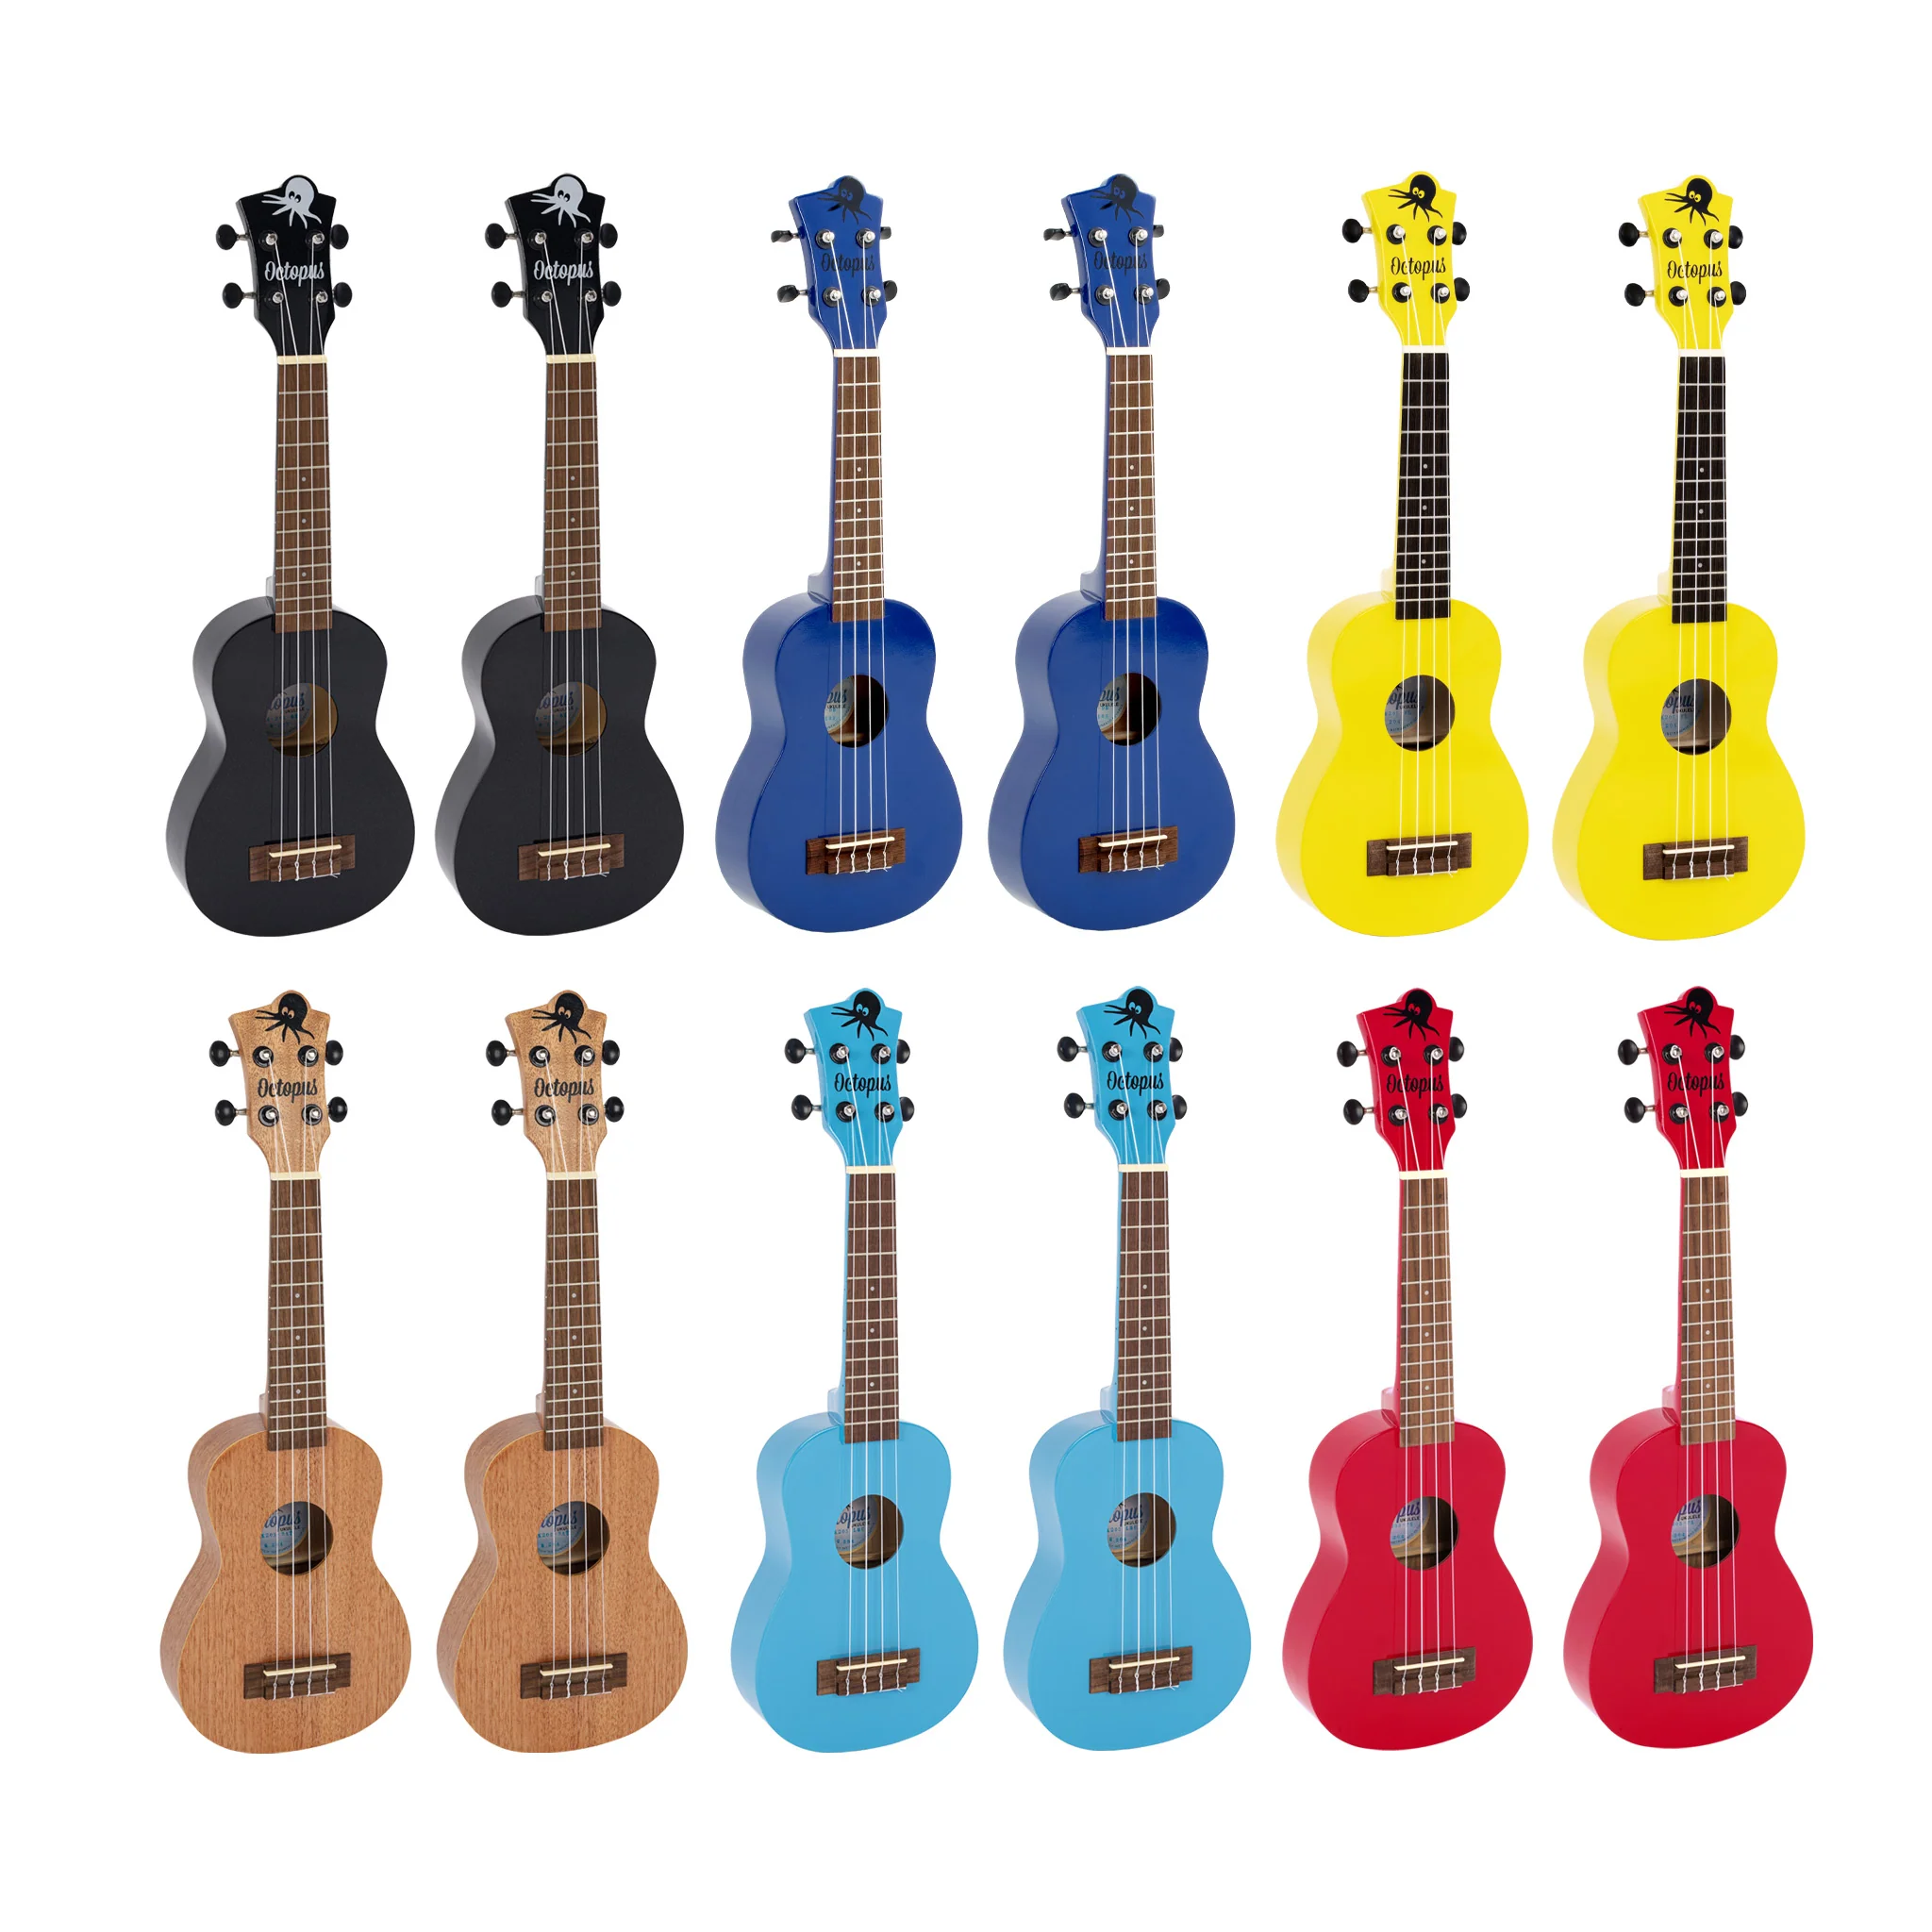 win these ukeleles with Blippit Boards